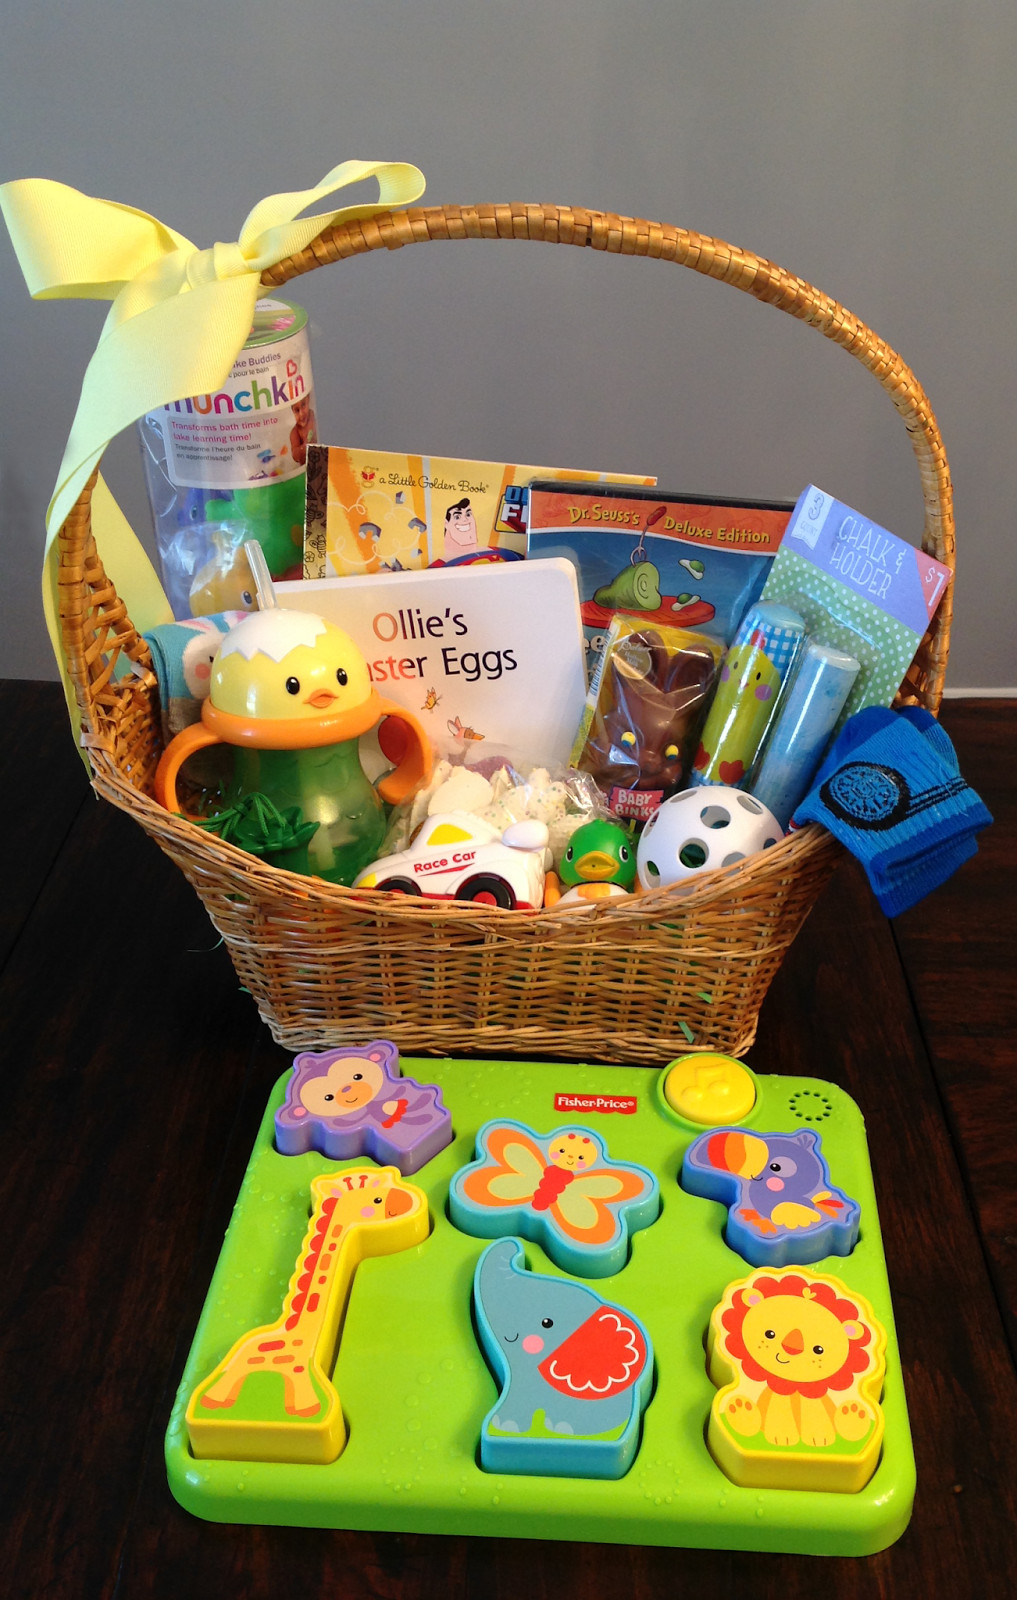 Toddler Boys Gift Ideas
 95 Easter Basket Ideas for Babies and Toddlers